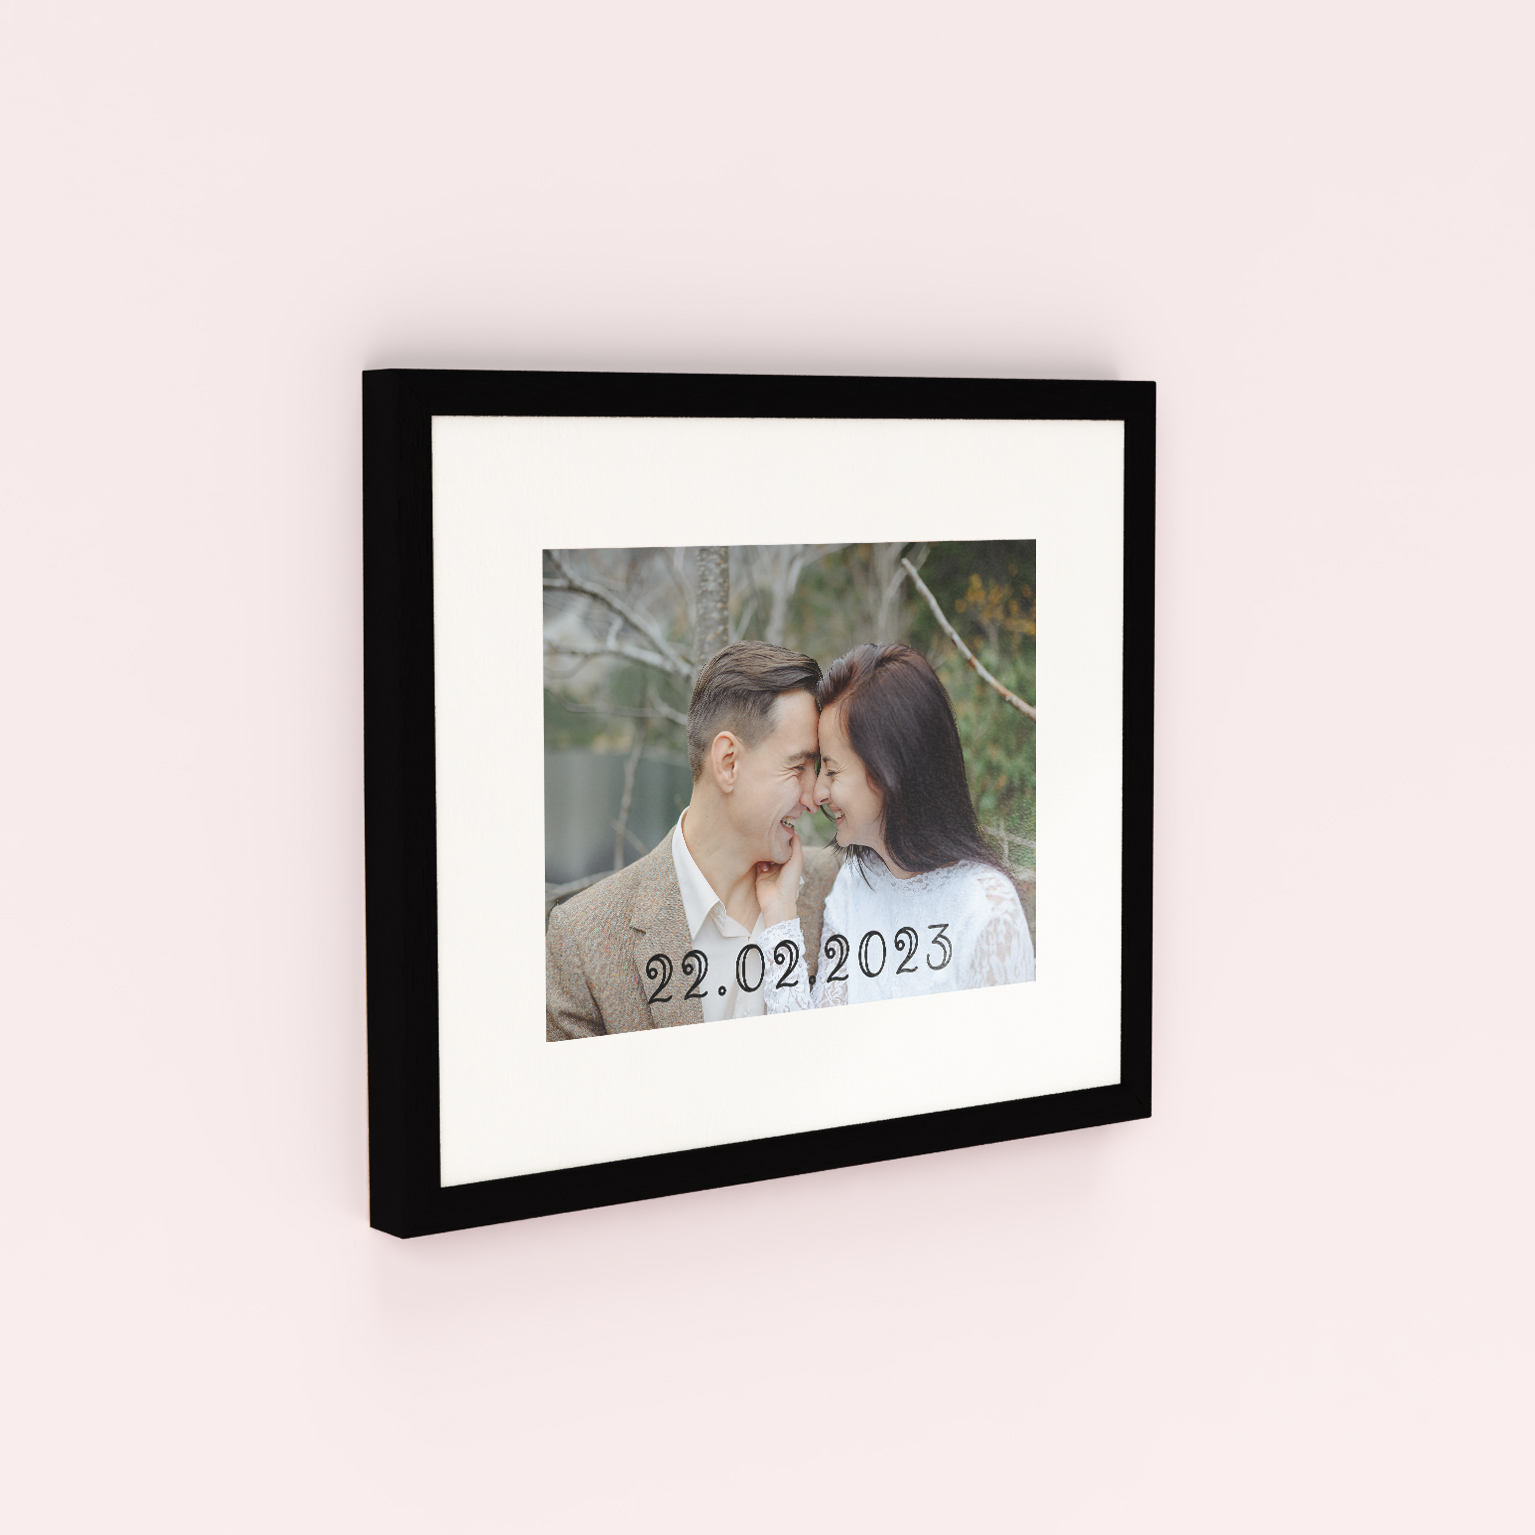 Forever I Do Framed Photo Prints - Elegantly immortalize your special day with this charming framed print crafted from premium 2cm thick acrylic. Offering unparalleled clarity, it showcases cherished memories with peak quality. With its landscape orientation, it becomes a timeless and elegant memento, displaying your love and commitment in a captivating way.